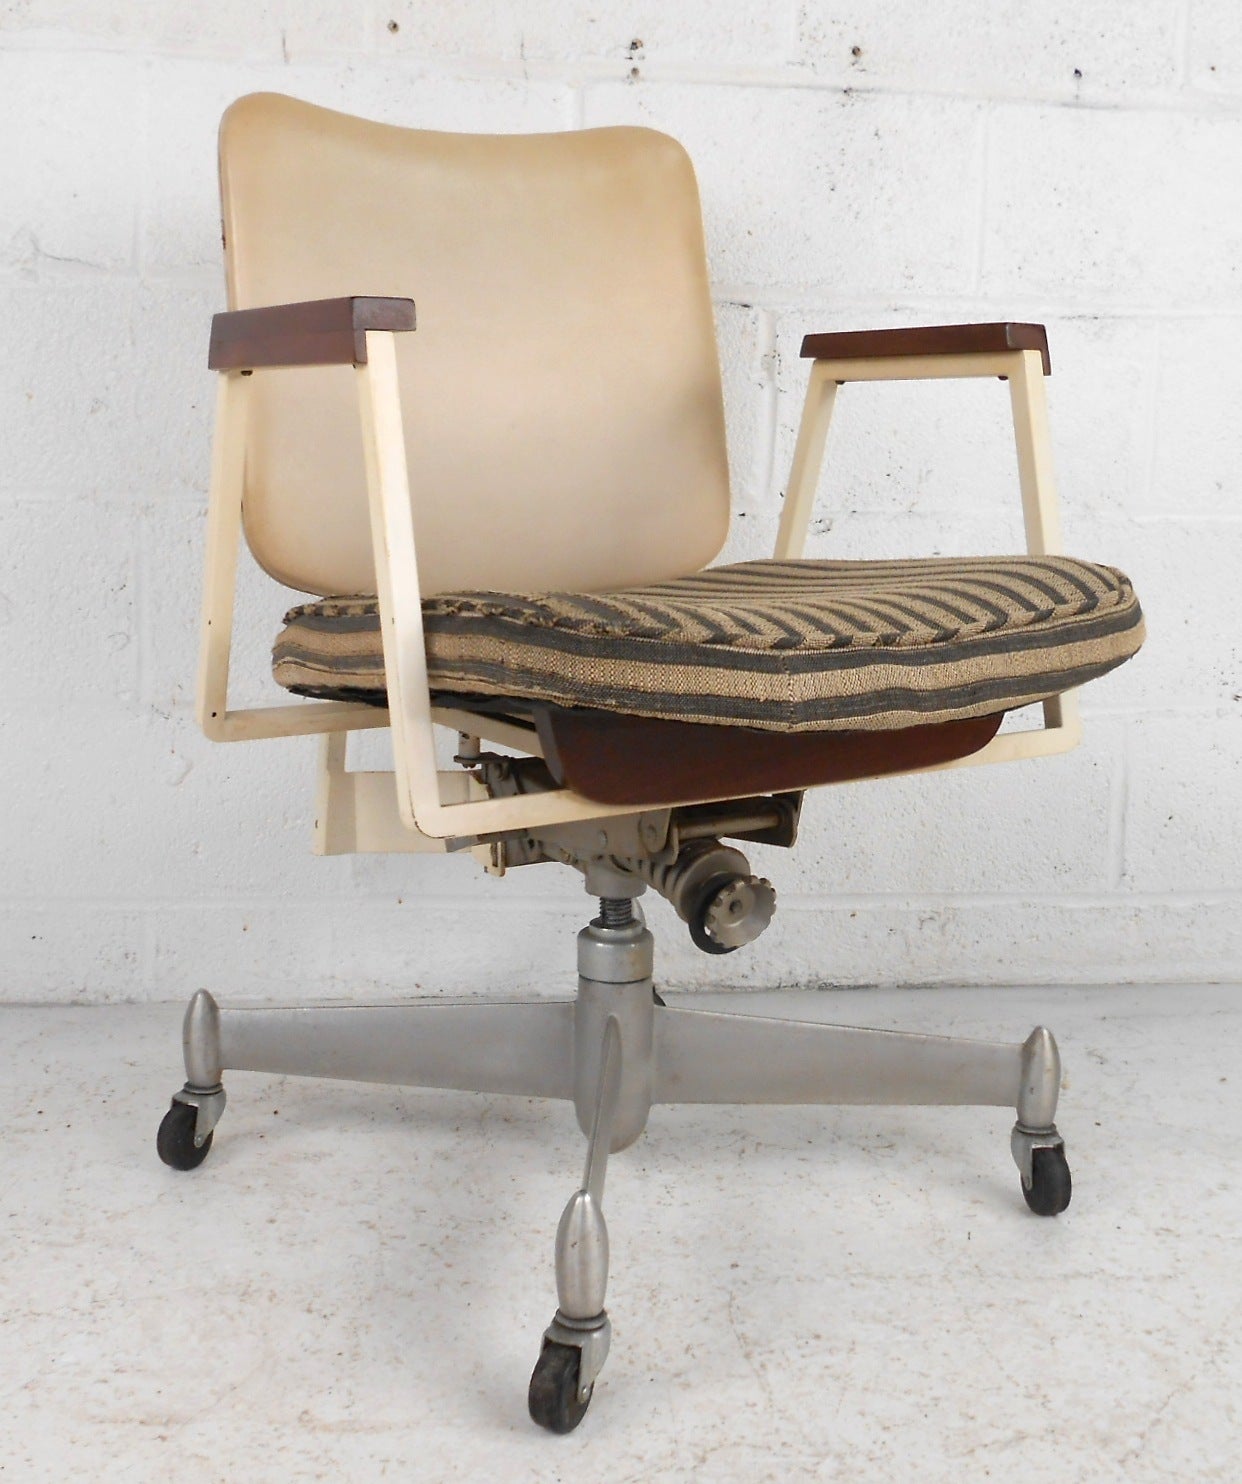 Very unusual office chair on casters with walnut trimmings. Cream colored seat back and matching metal frame set on a sturdy swivel base with casters. Nice detailing throughout.

(Please confirm item location - NY or NJ - with dealer)